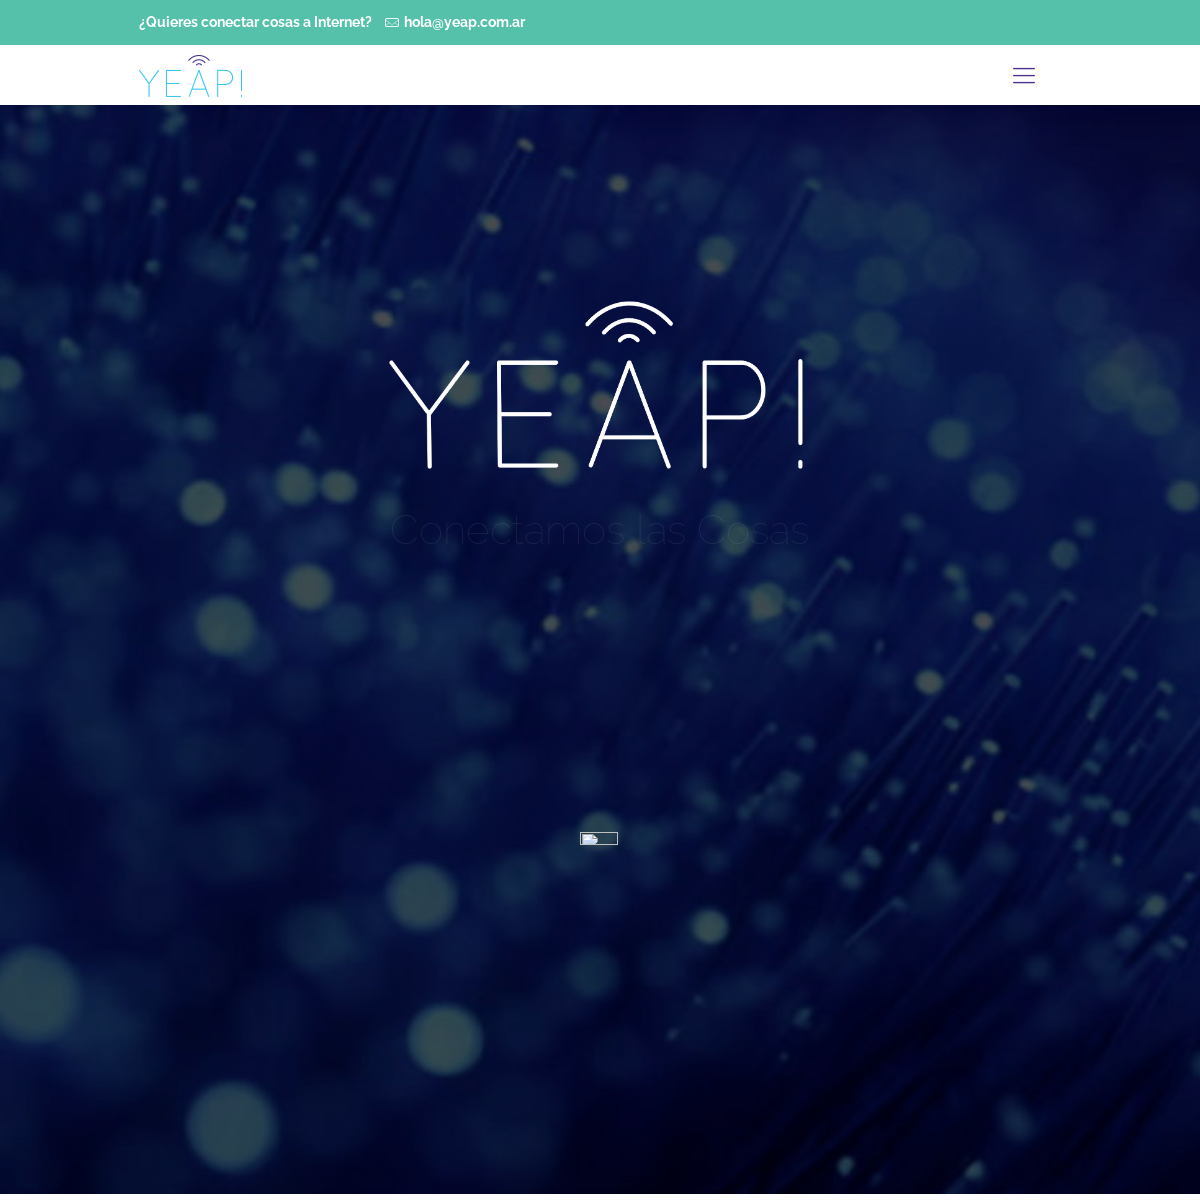 A complete backup of yeap.com.ar